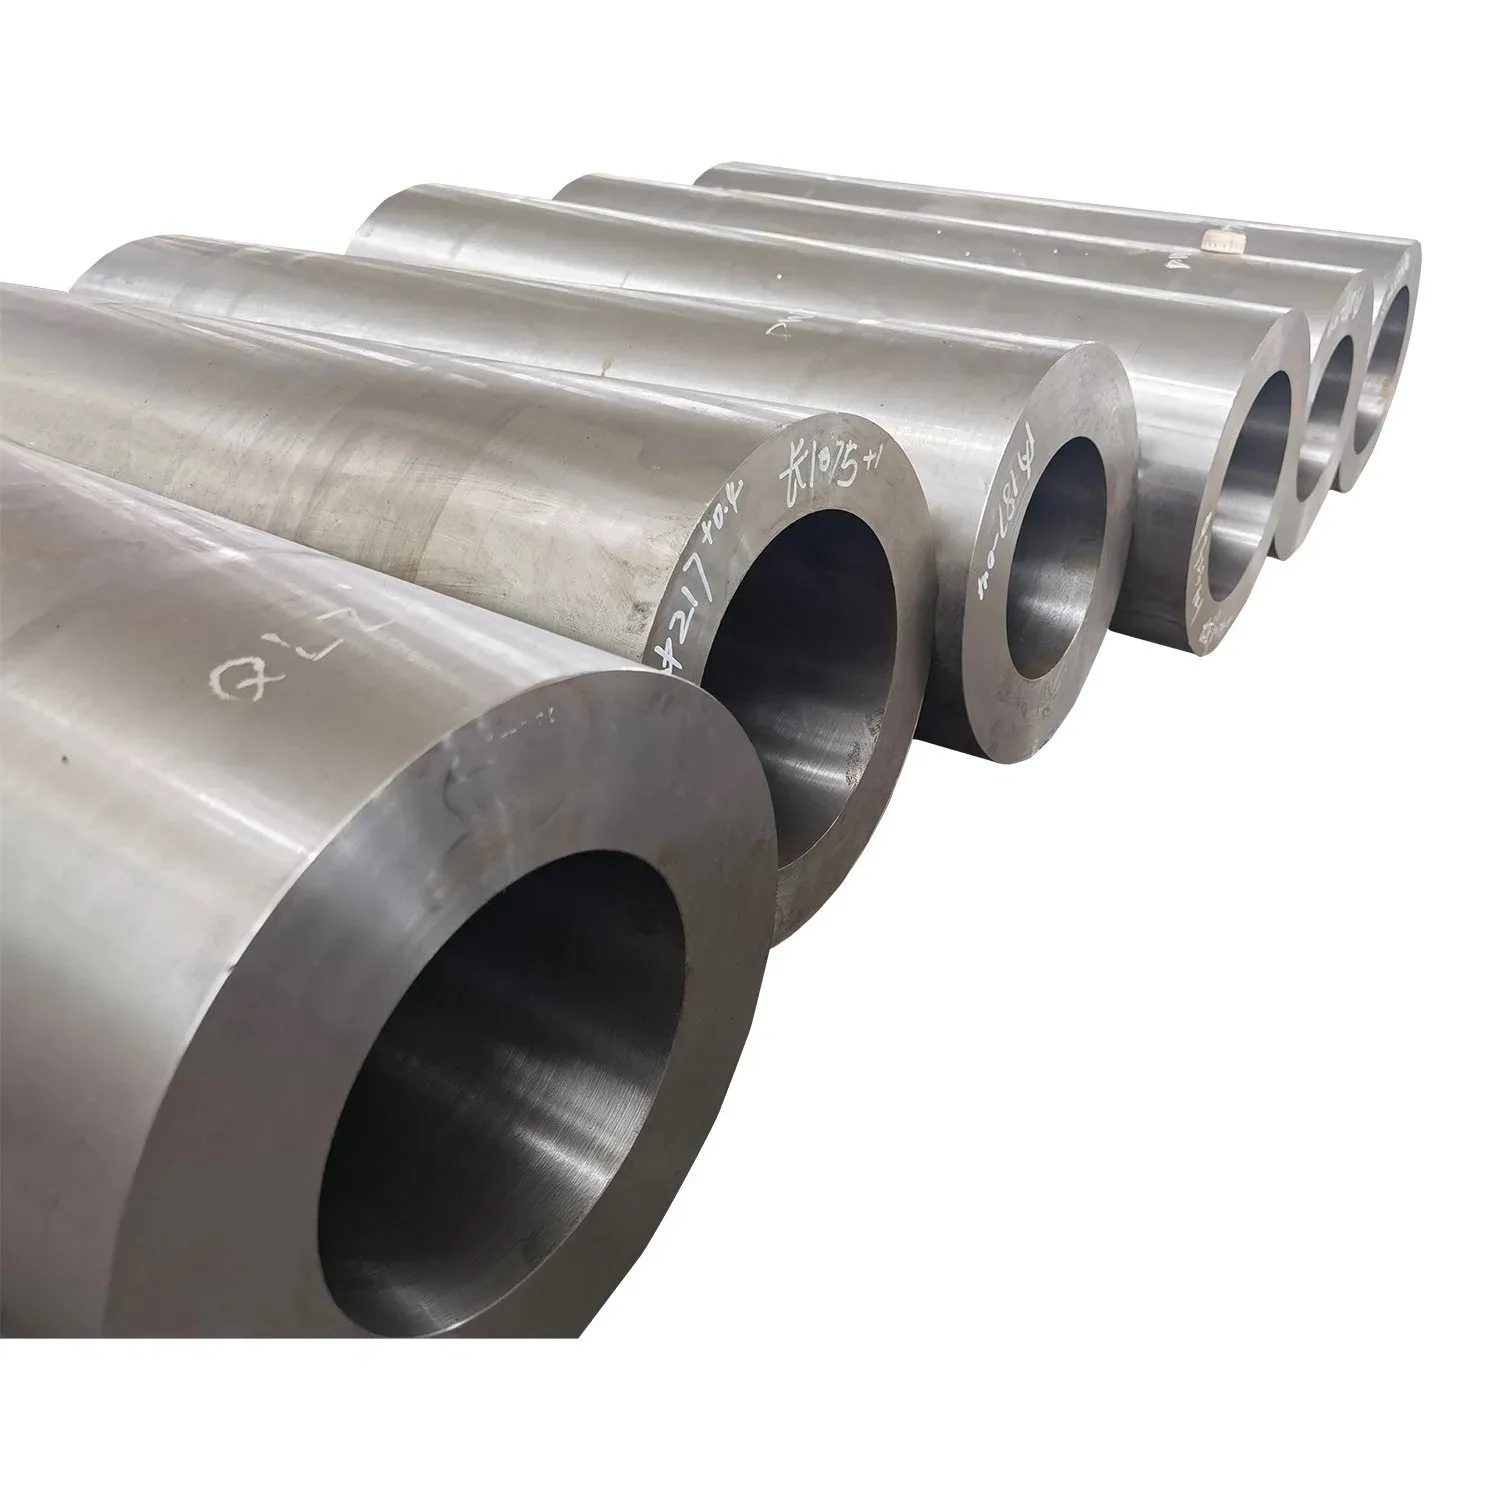 Casting Forging St 37.4 St 44 Forged Carbon Steel Seamless Tube Pipe